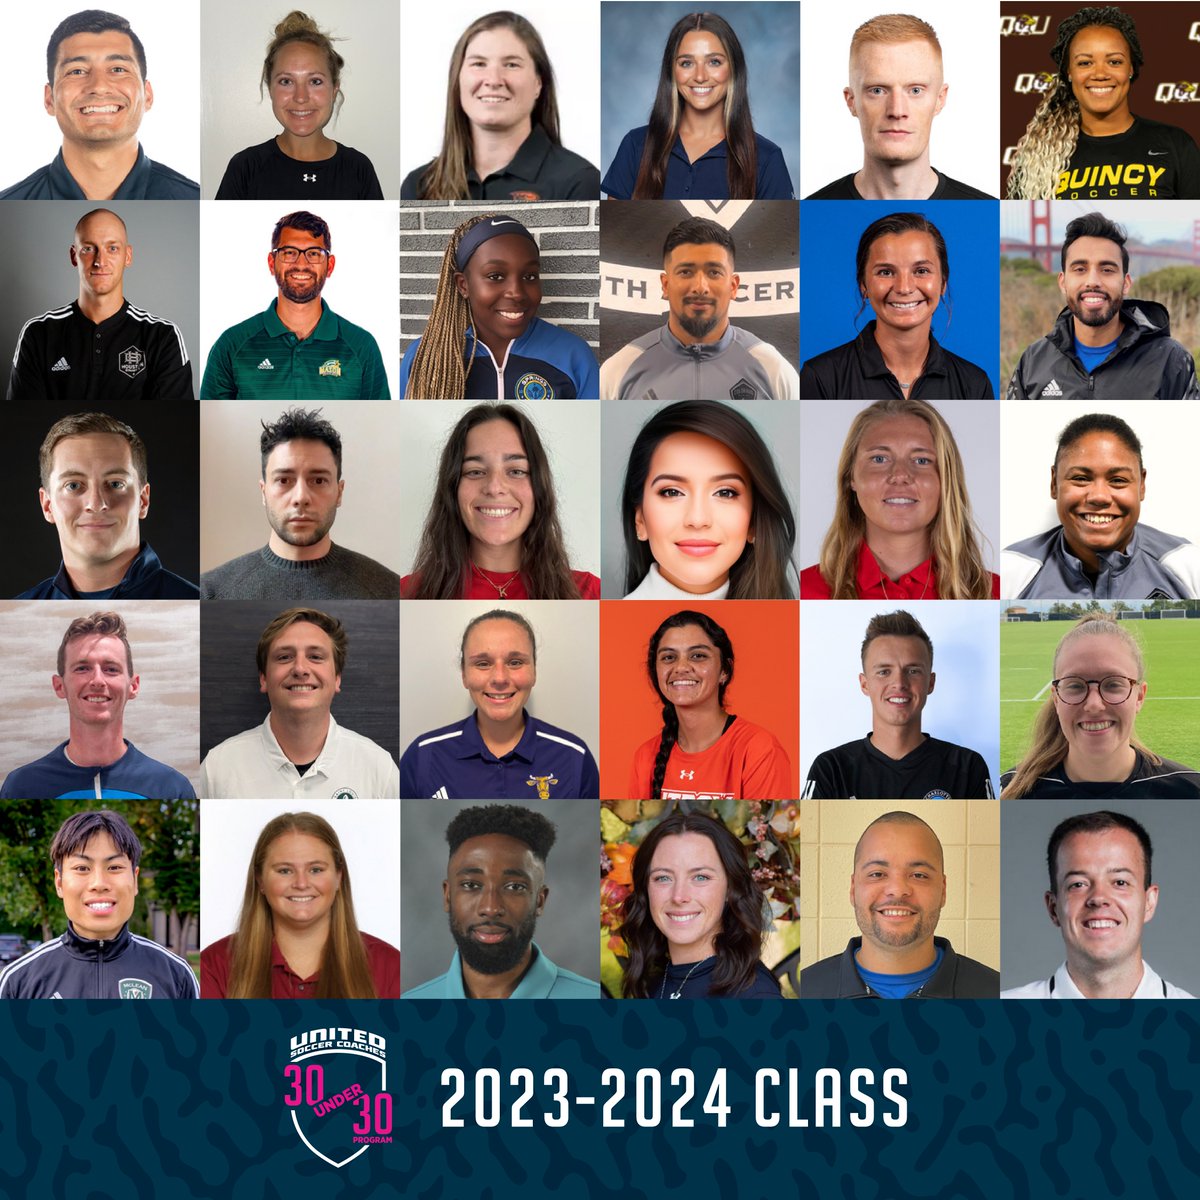 United Soccer Coaches is proud to introduce the 2023-24 Class of the 30 Under 30 Program. The class features 30 individuals selected from a pool of over 270 applicants. Read more: bit.ly/3LZLCWa